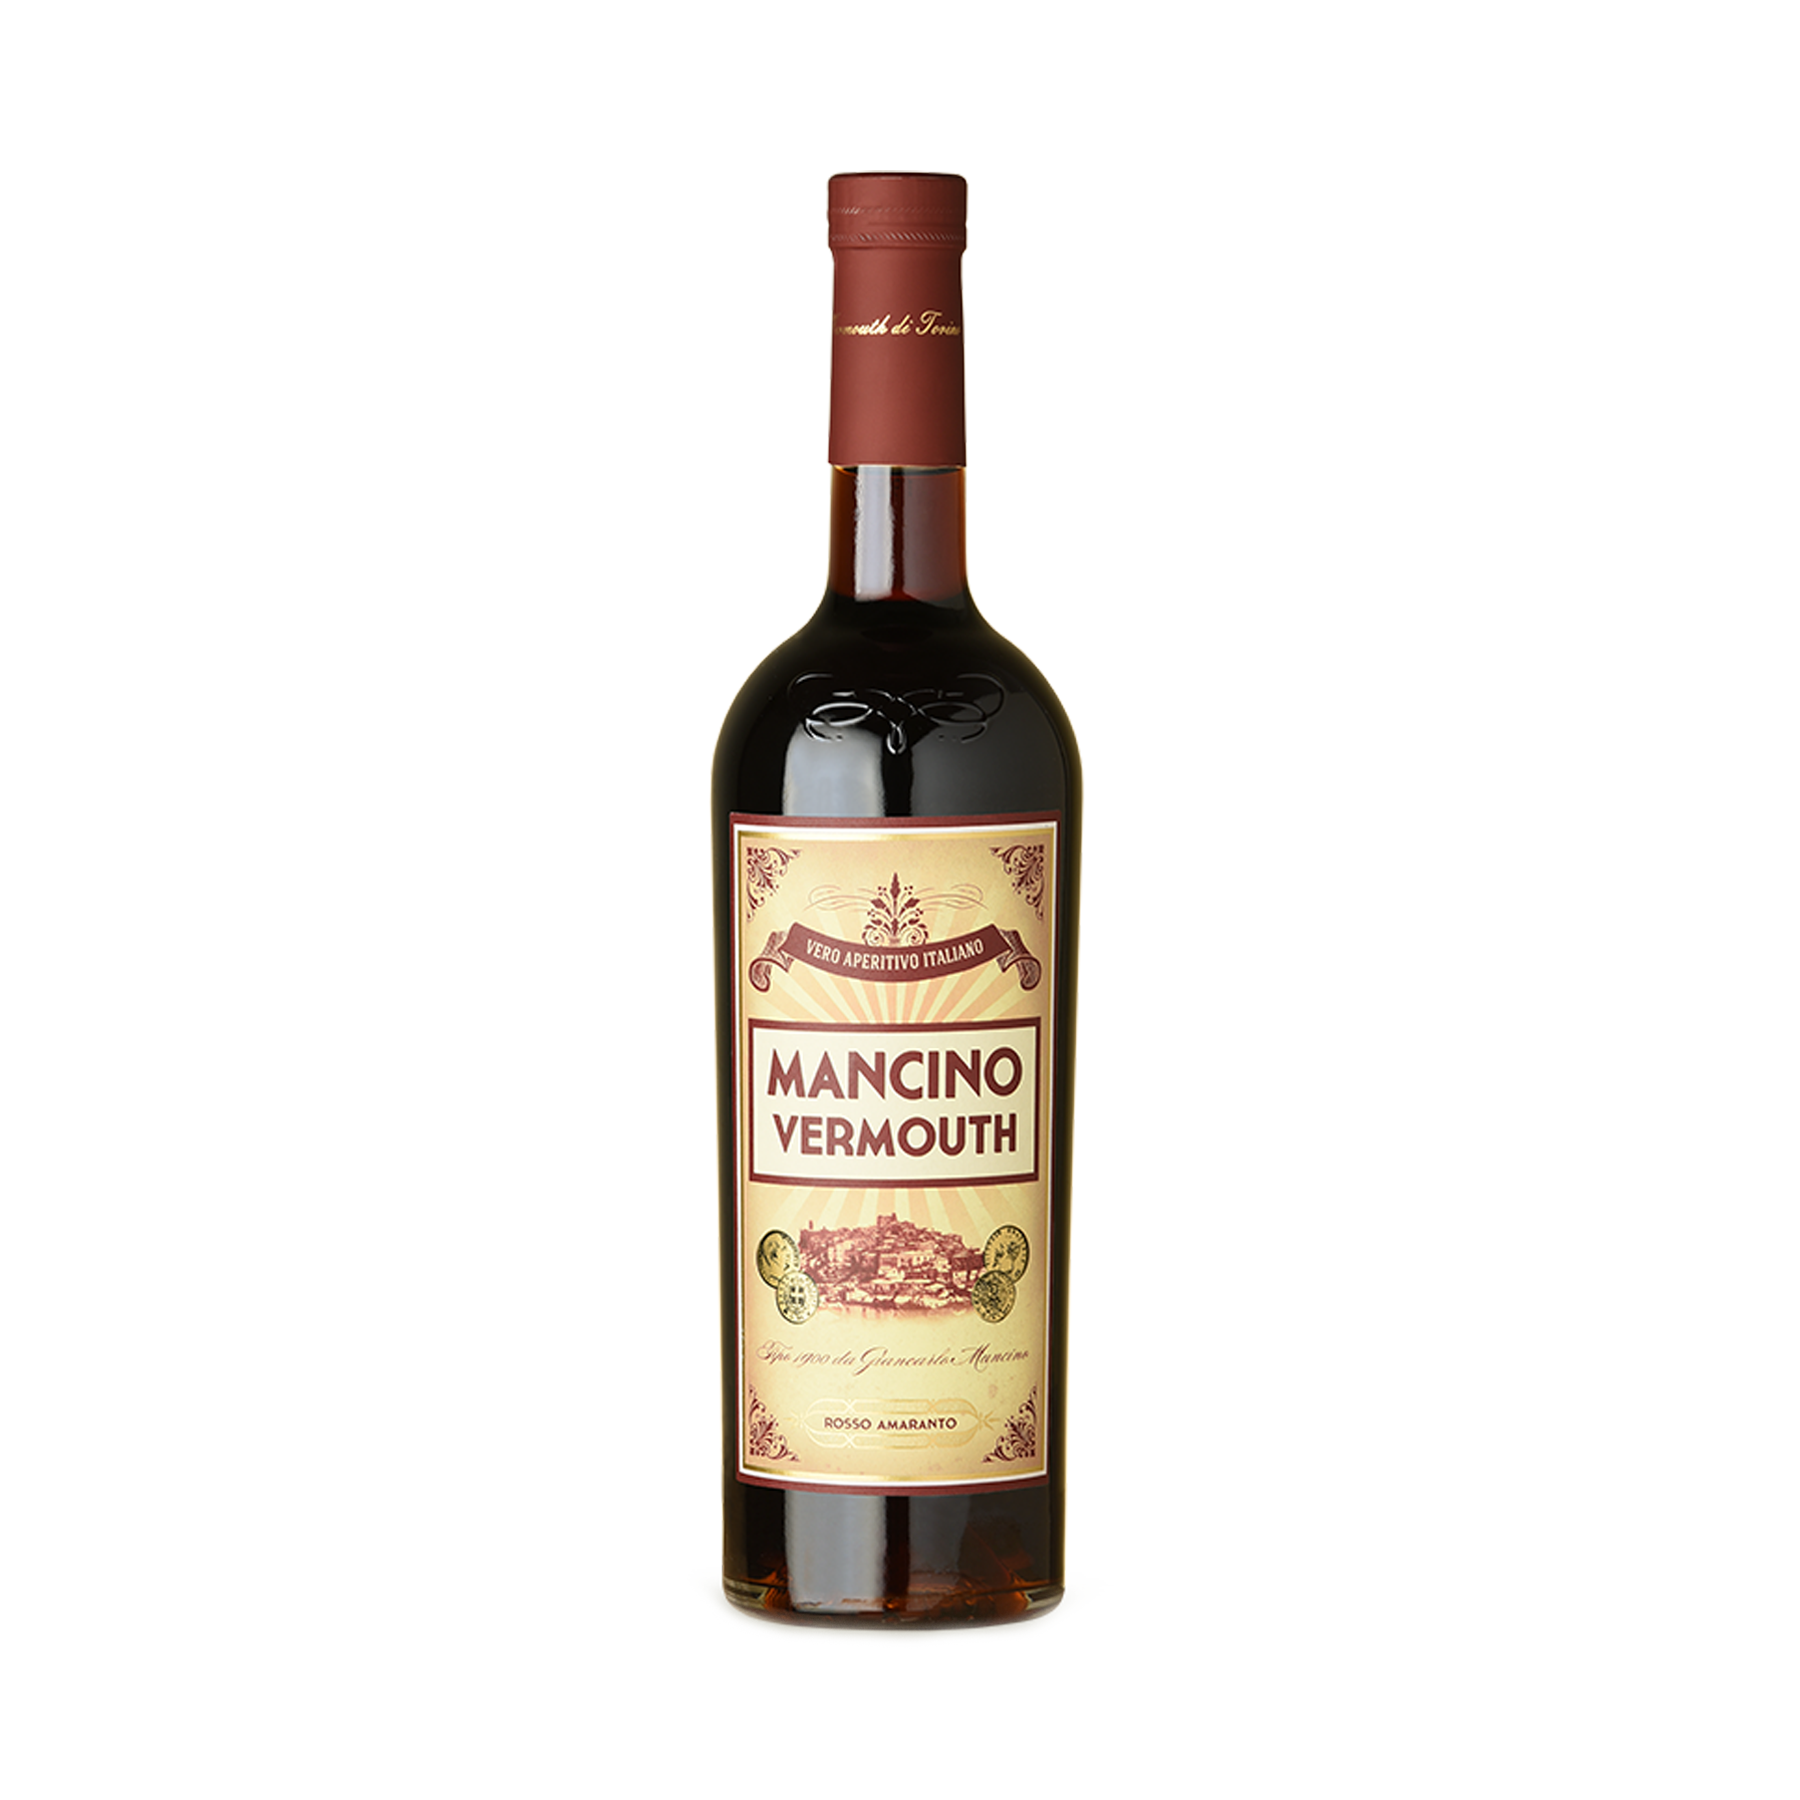 MANCINO VERMOUTH ROUGE 750 MLT 16%